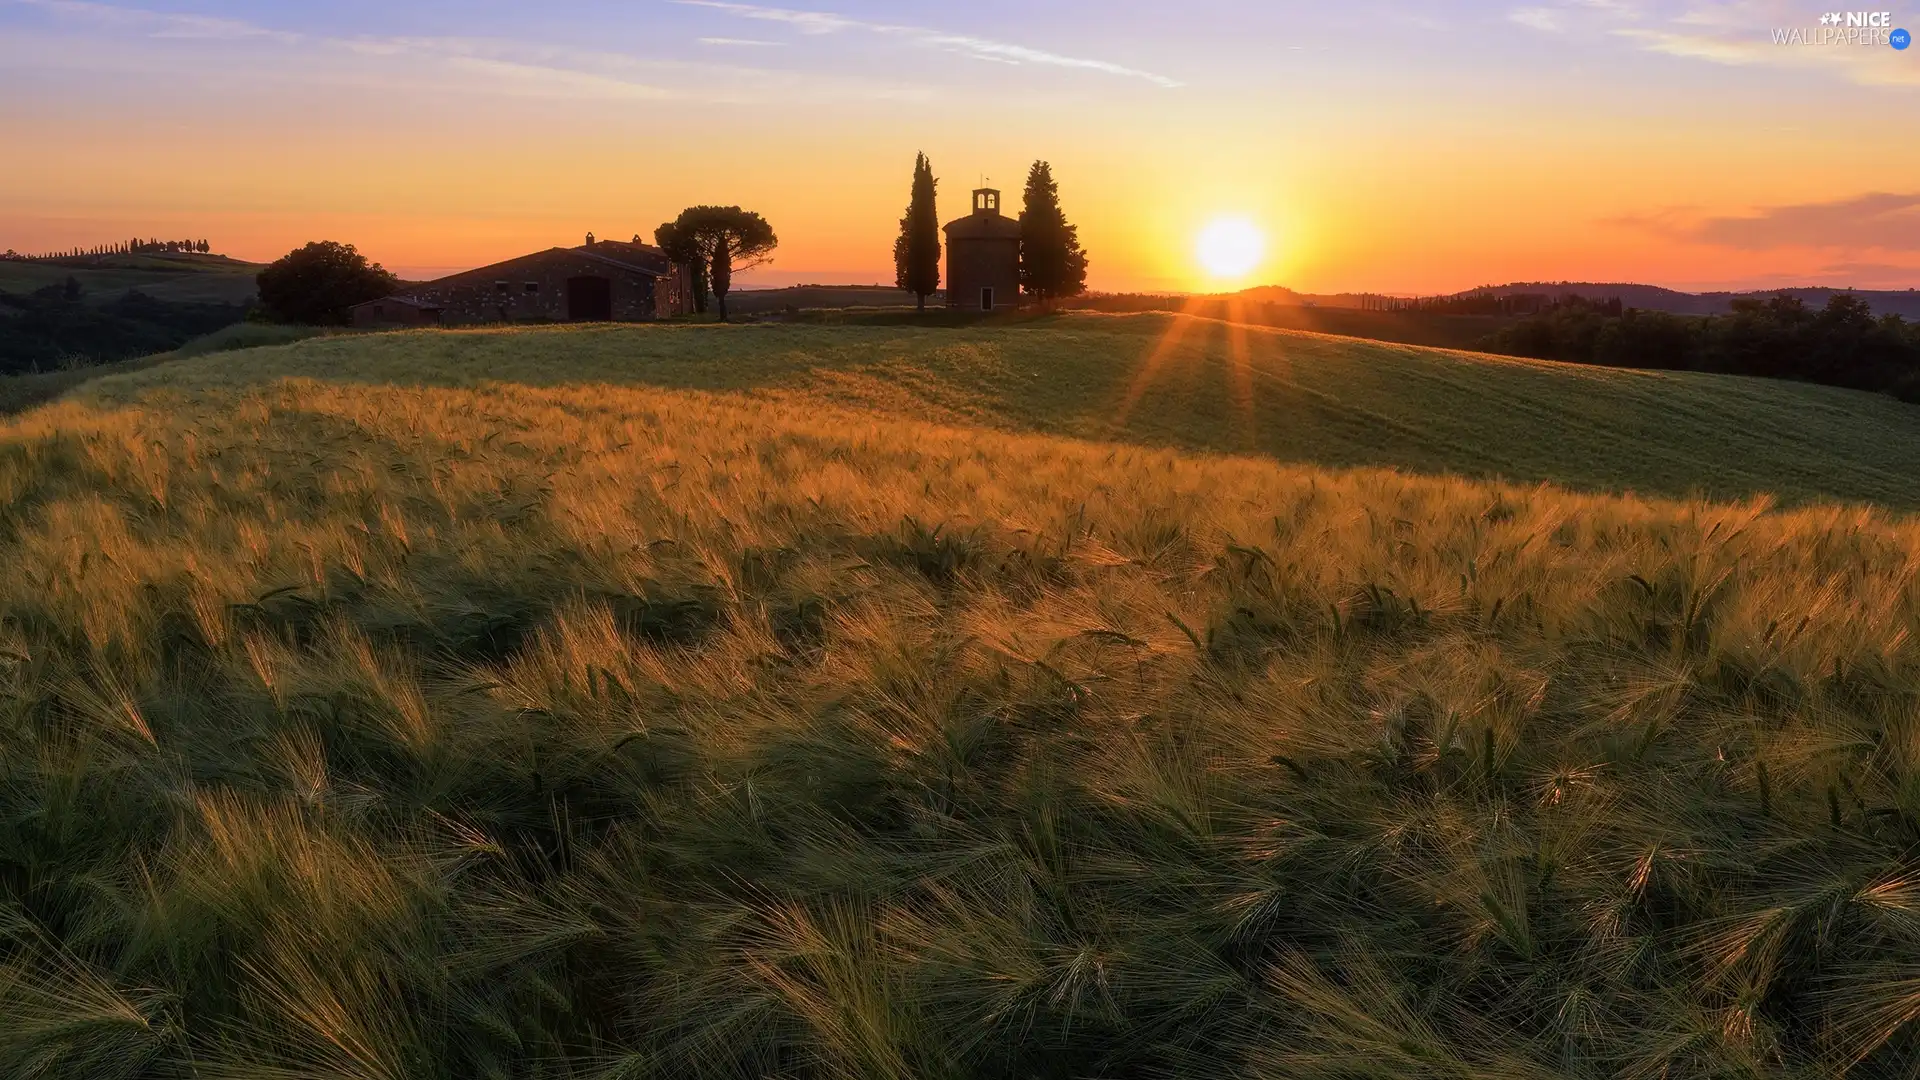 house, tower, Italy, belfry, Tuscany, corn, Field, Great Sunsets